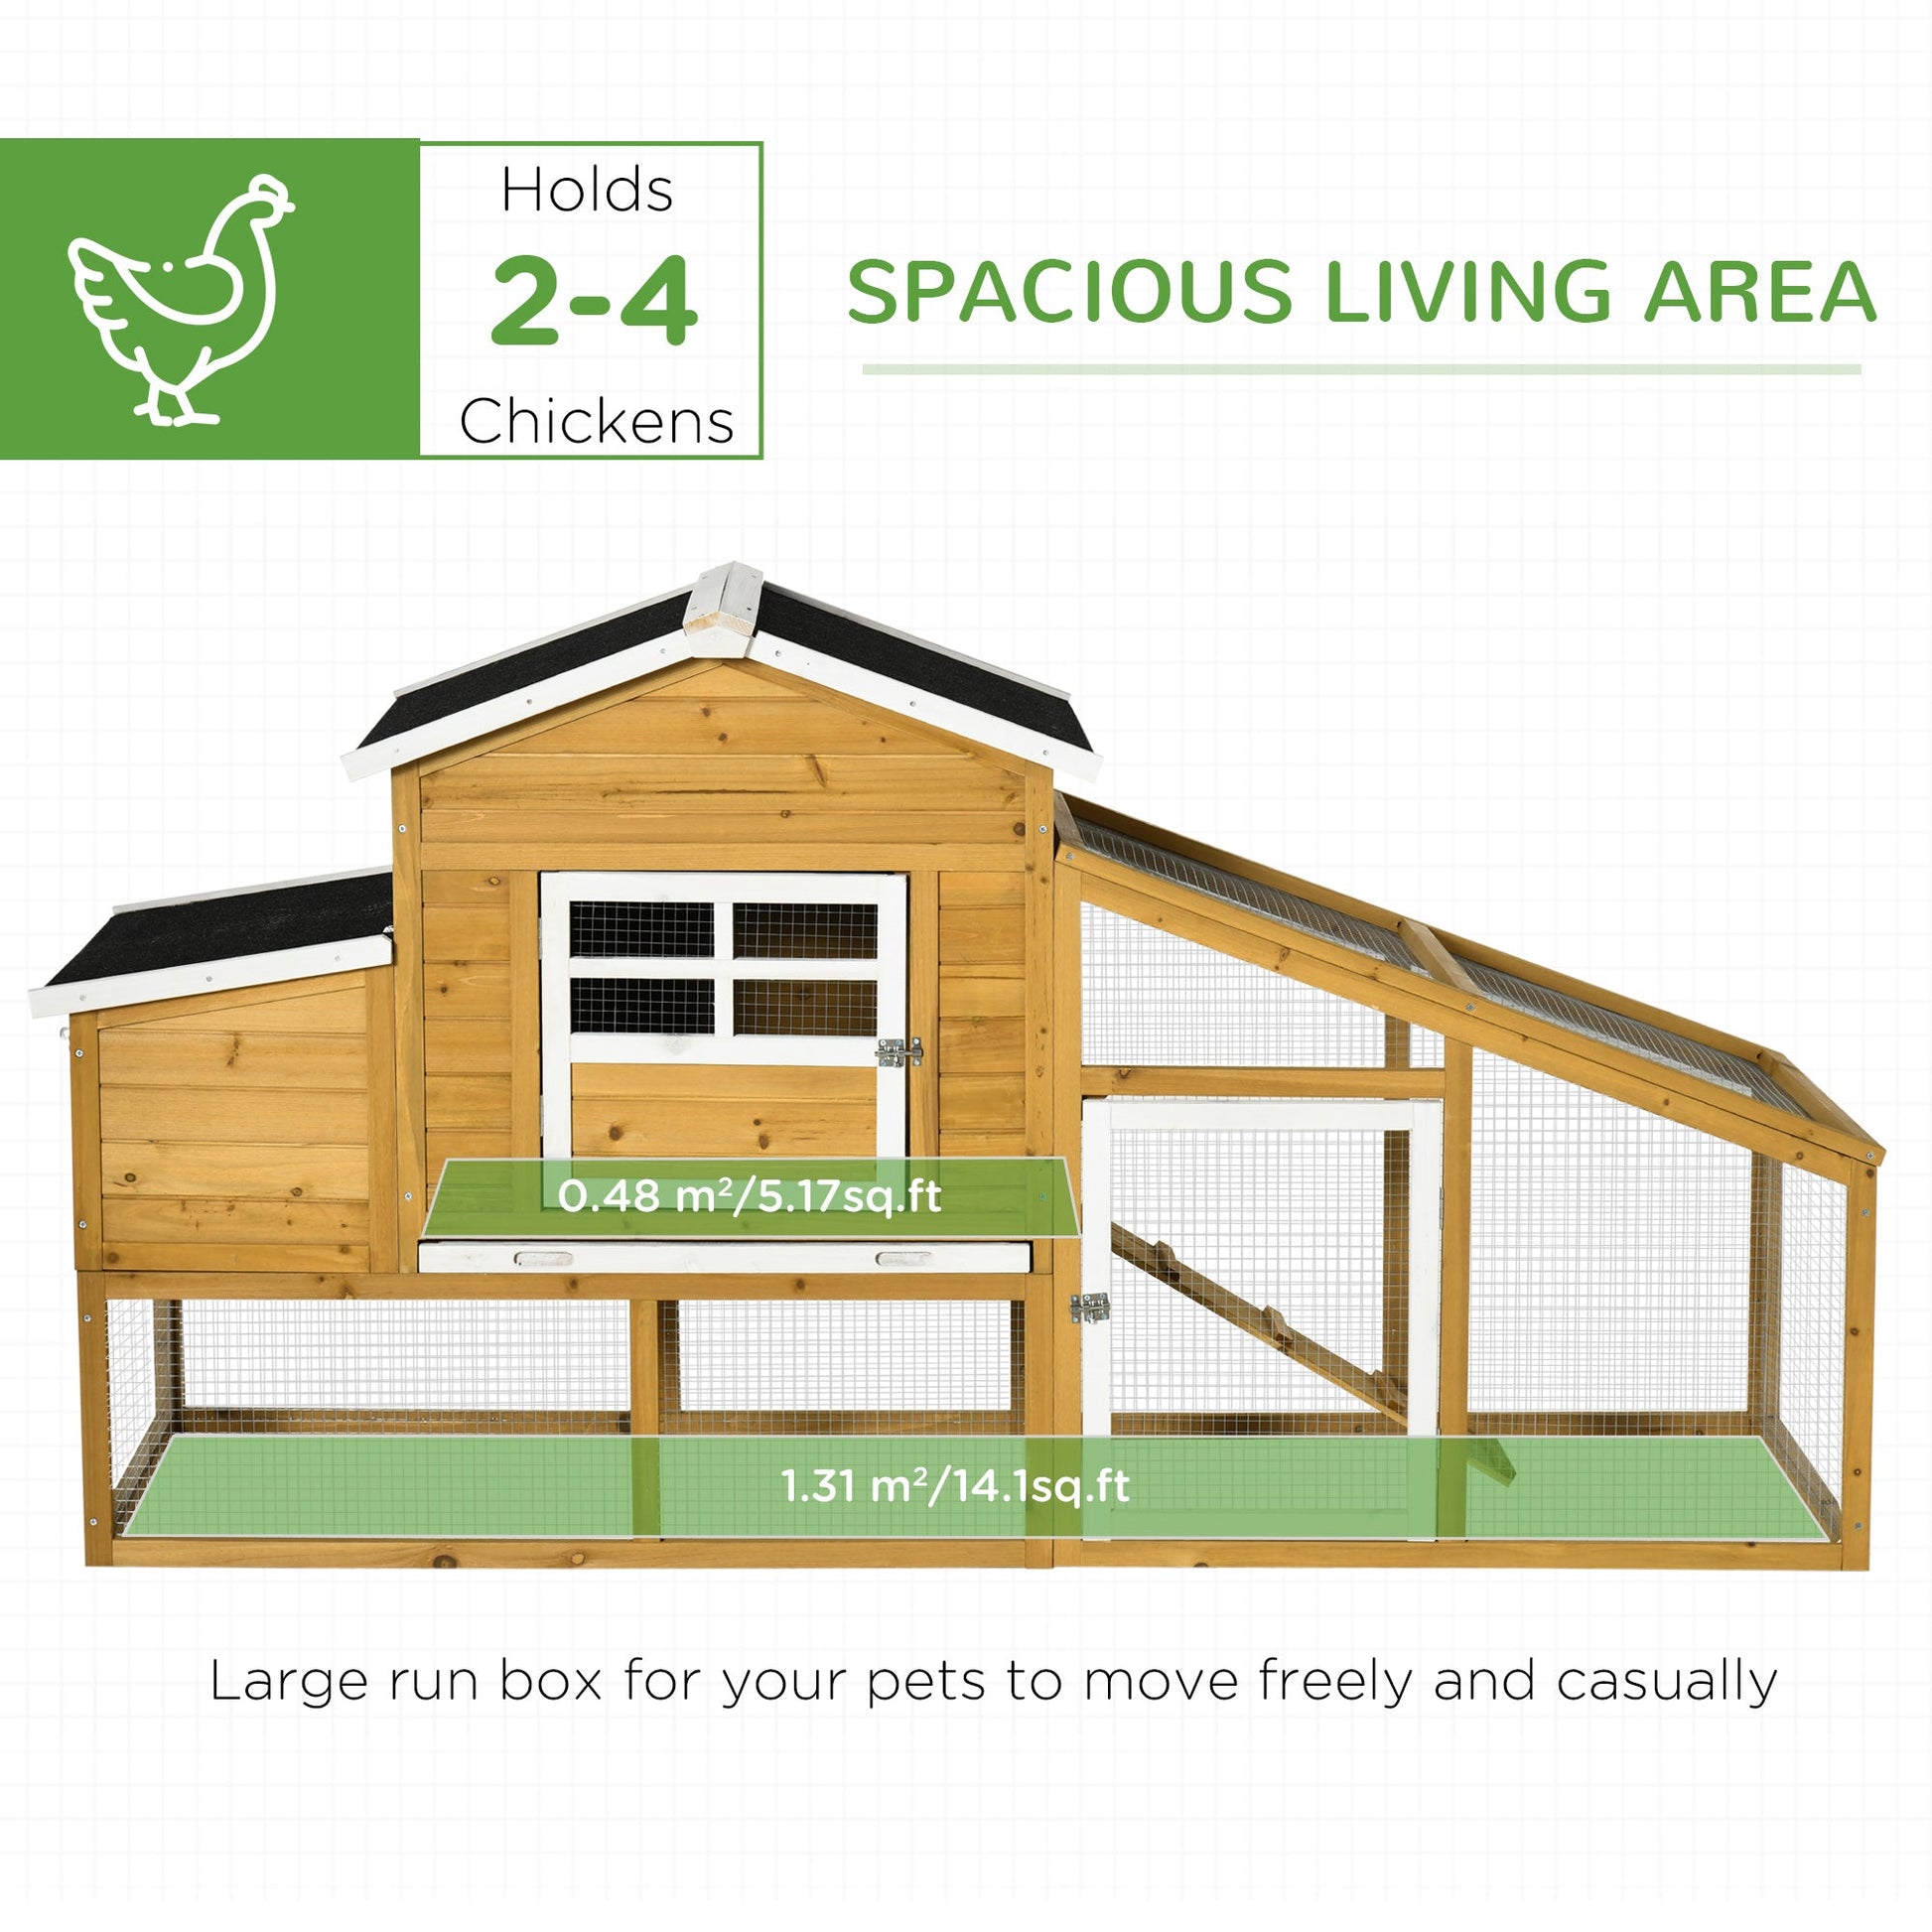 79" Wooden Chicken Coop, Outdoor Hen House, Poultry Habitat with Removable Tray, Nesting Box, Run, Ramp at Gallery Canada